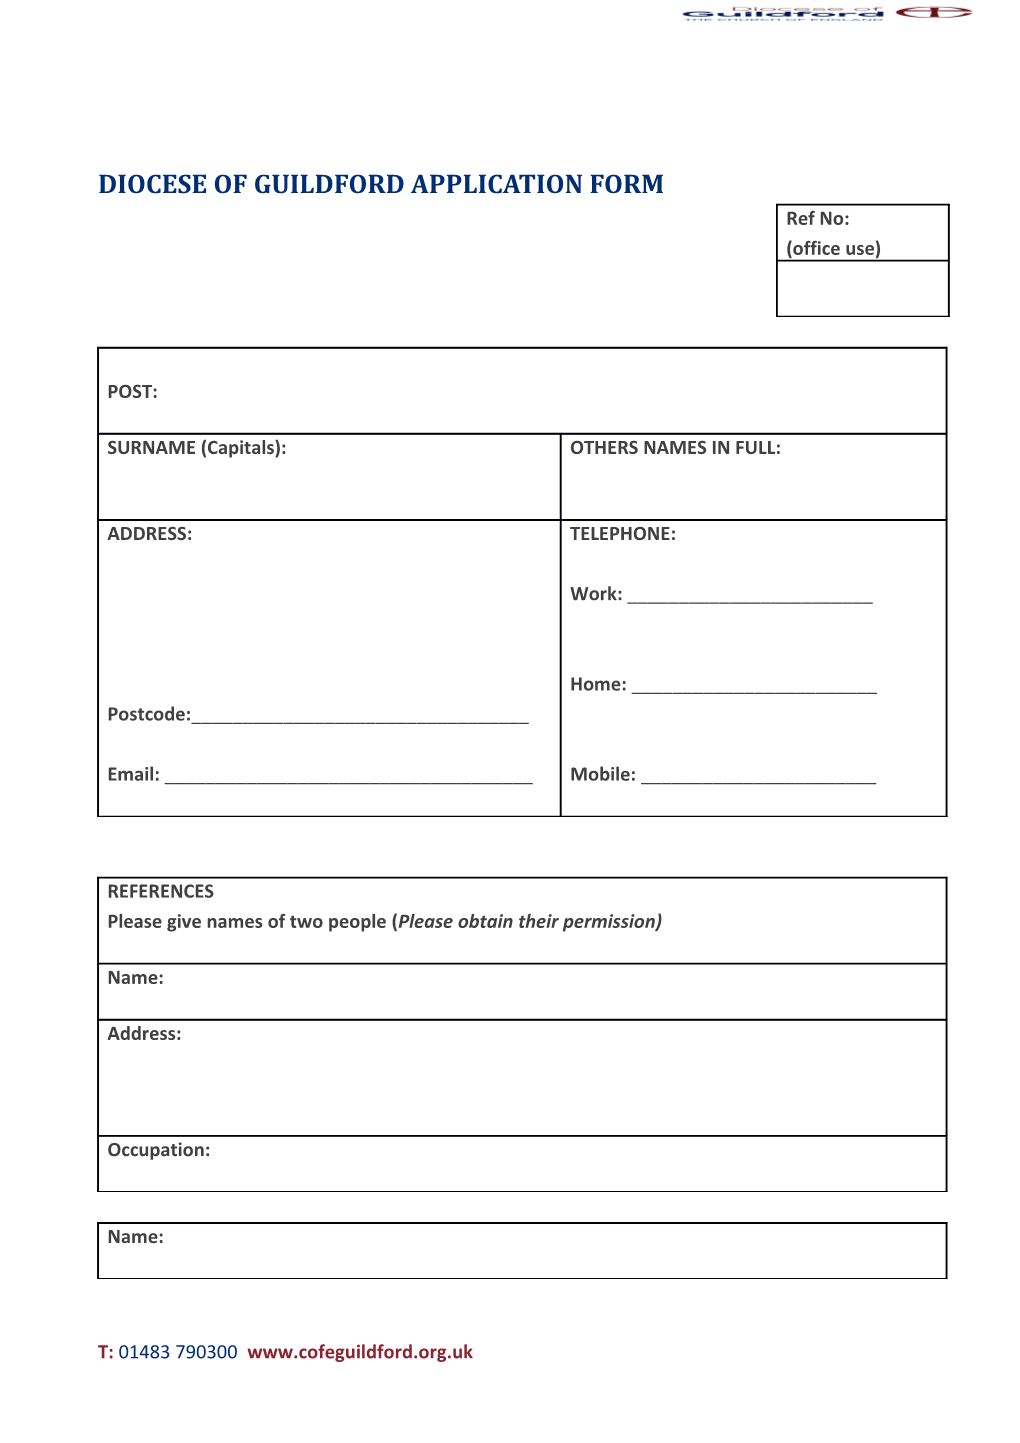 Diocese of Guildford Application Form